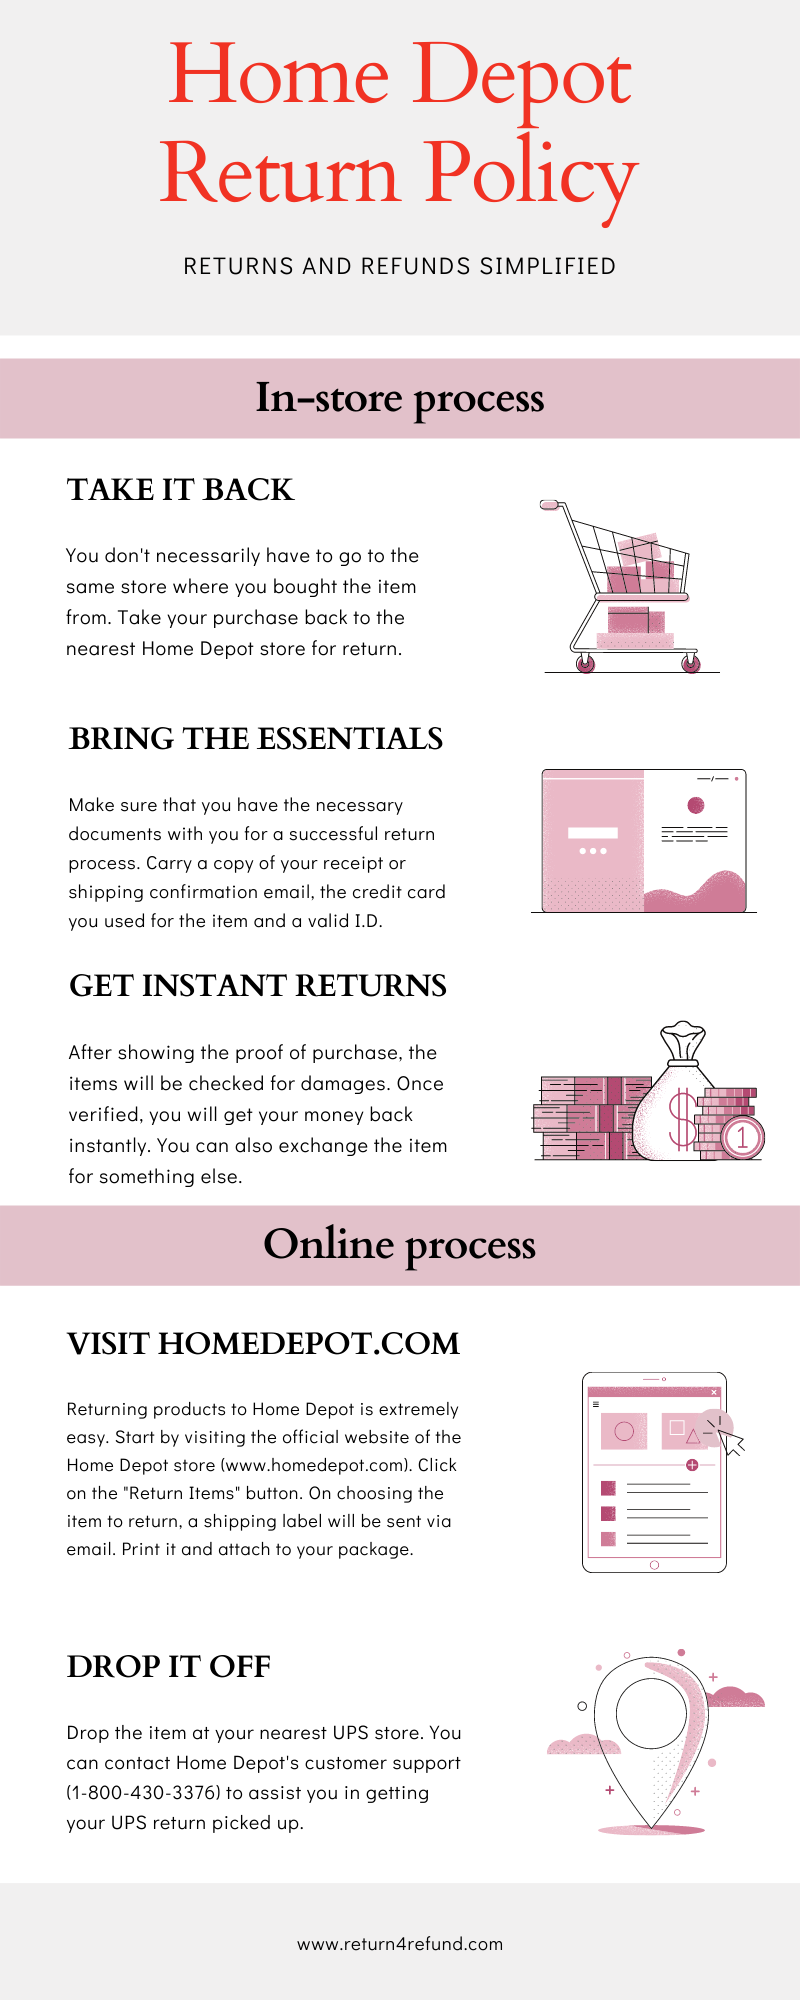 Home Depot's Return Policy infographic